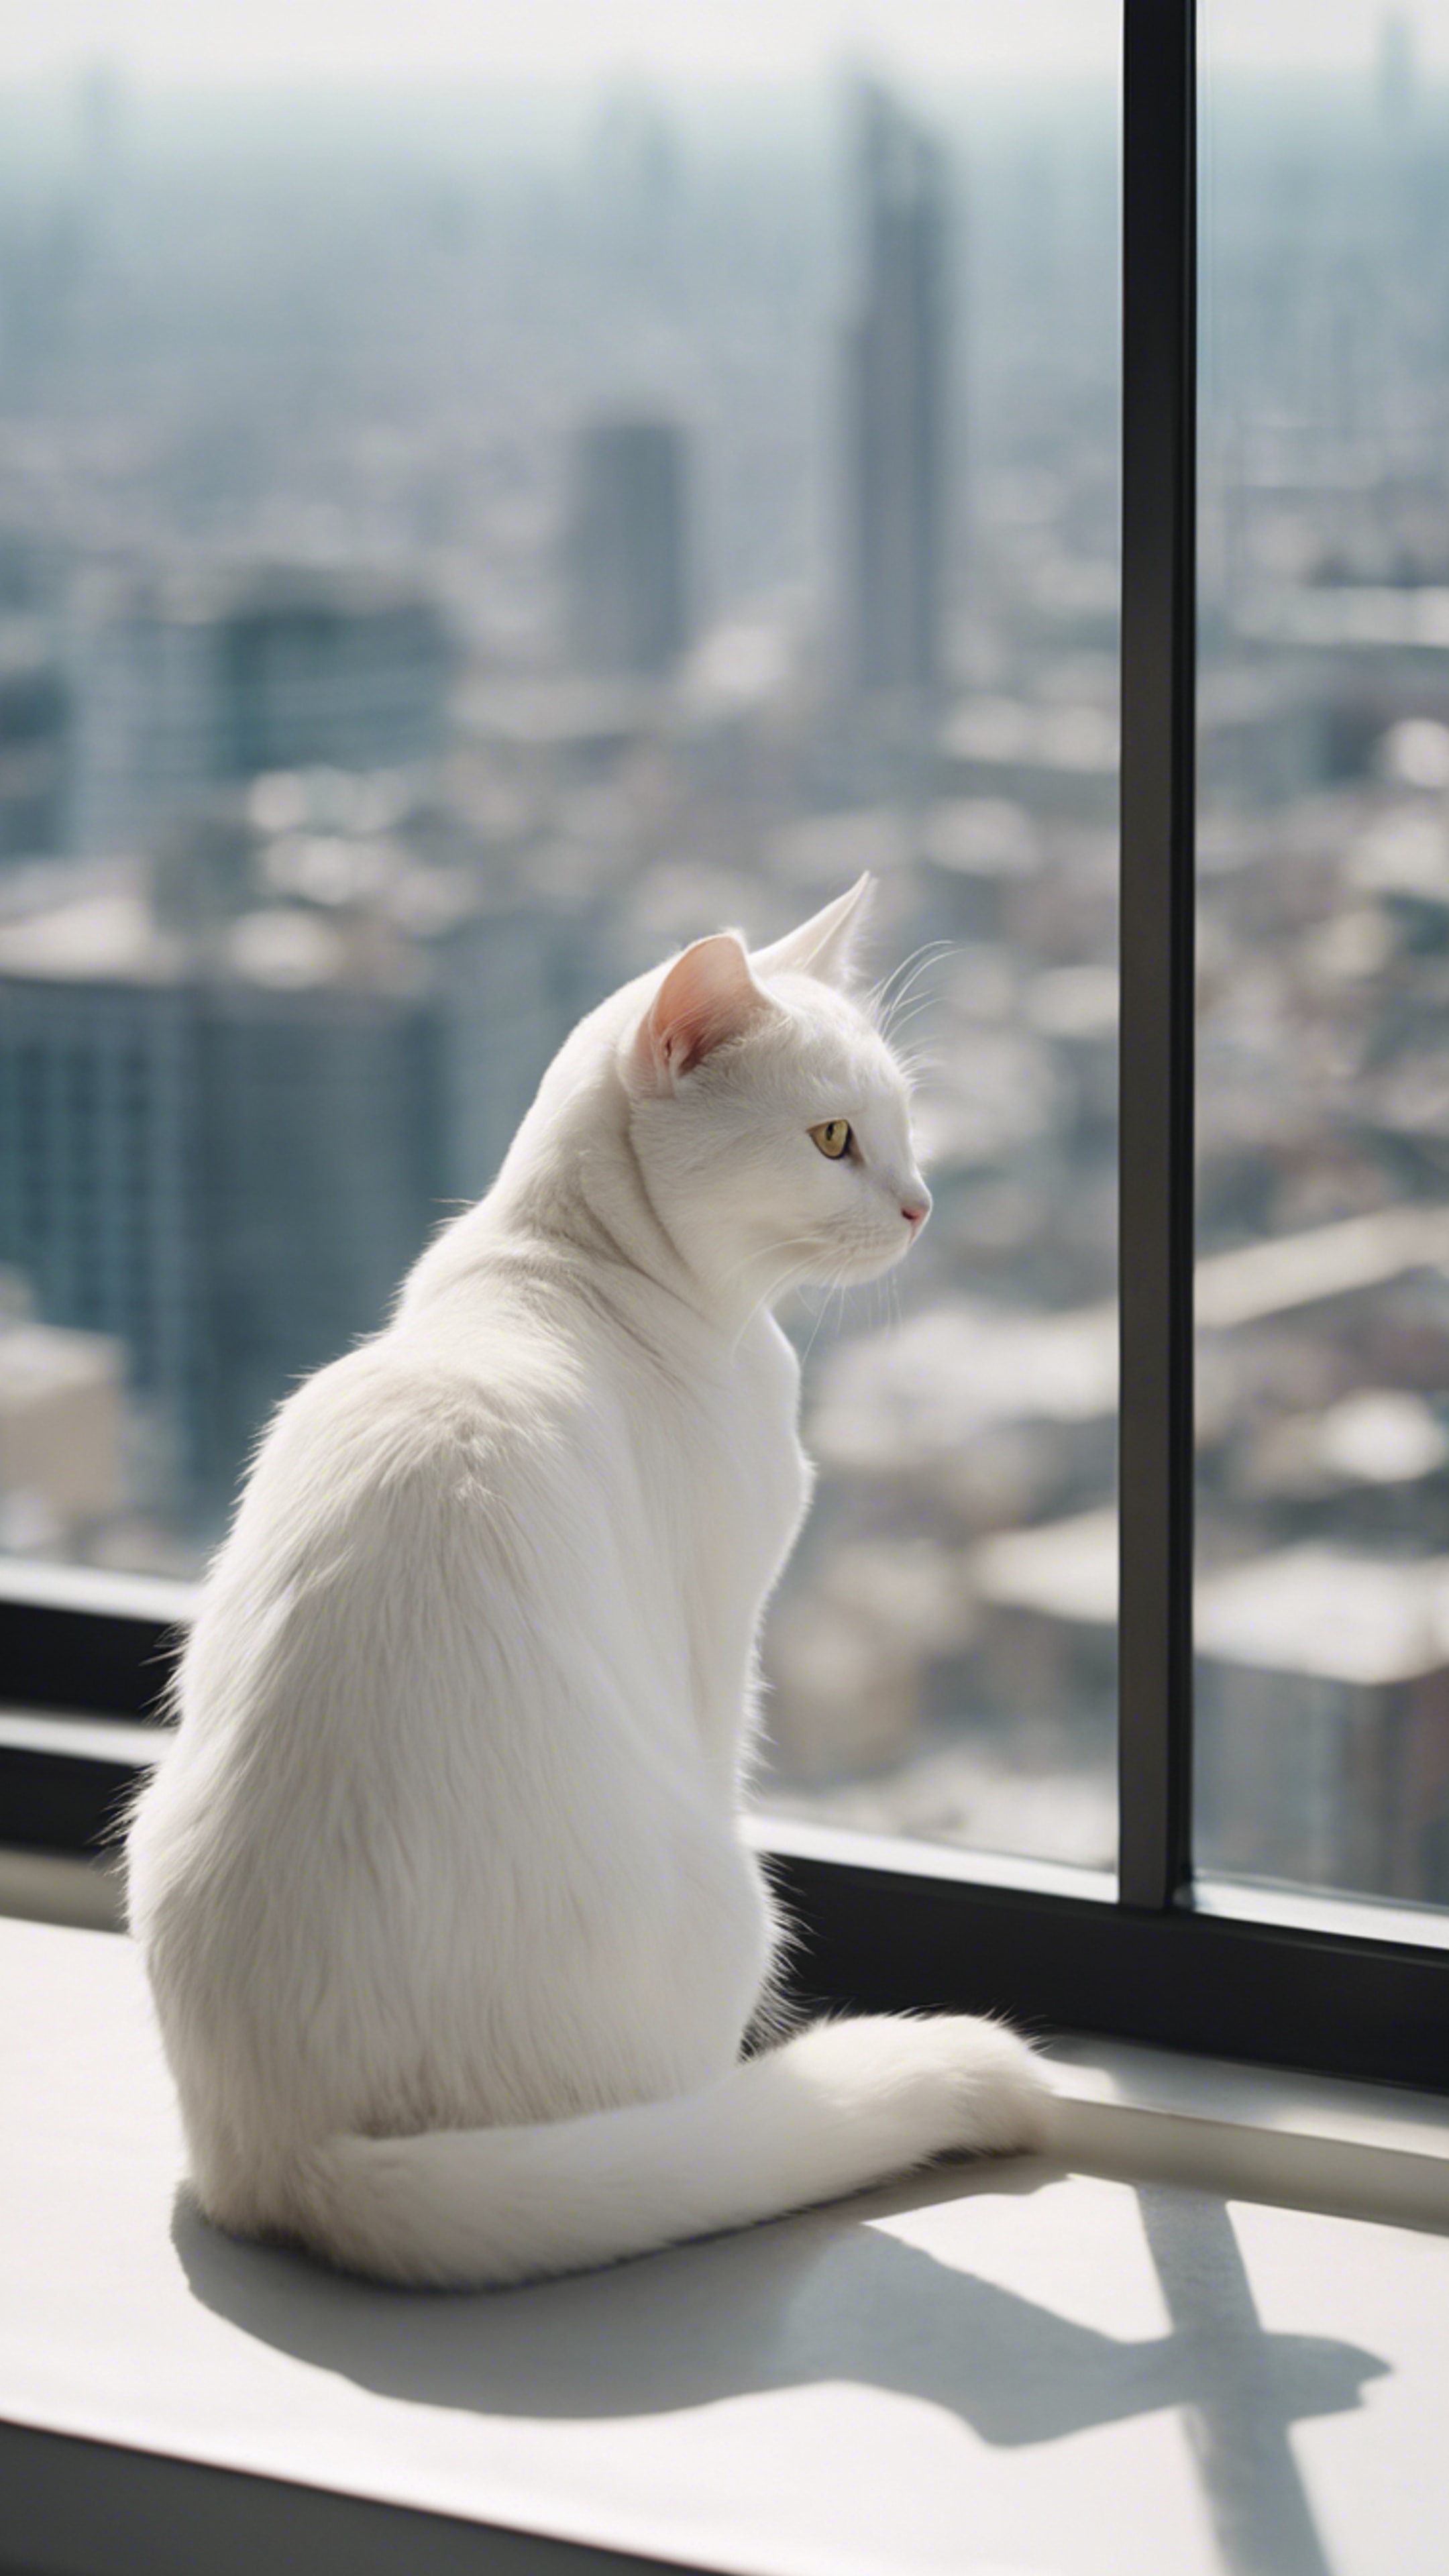 A white cat lying peacefully on a windowsill, admiring a city view from a skyscraper.壁紙[751c381e97644d32a2eb]